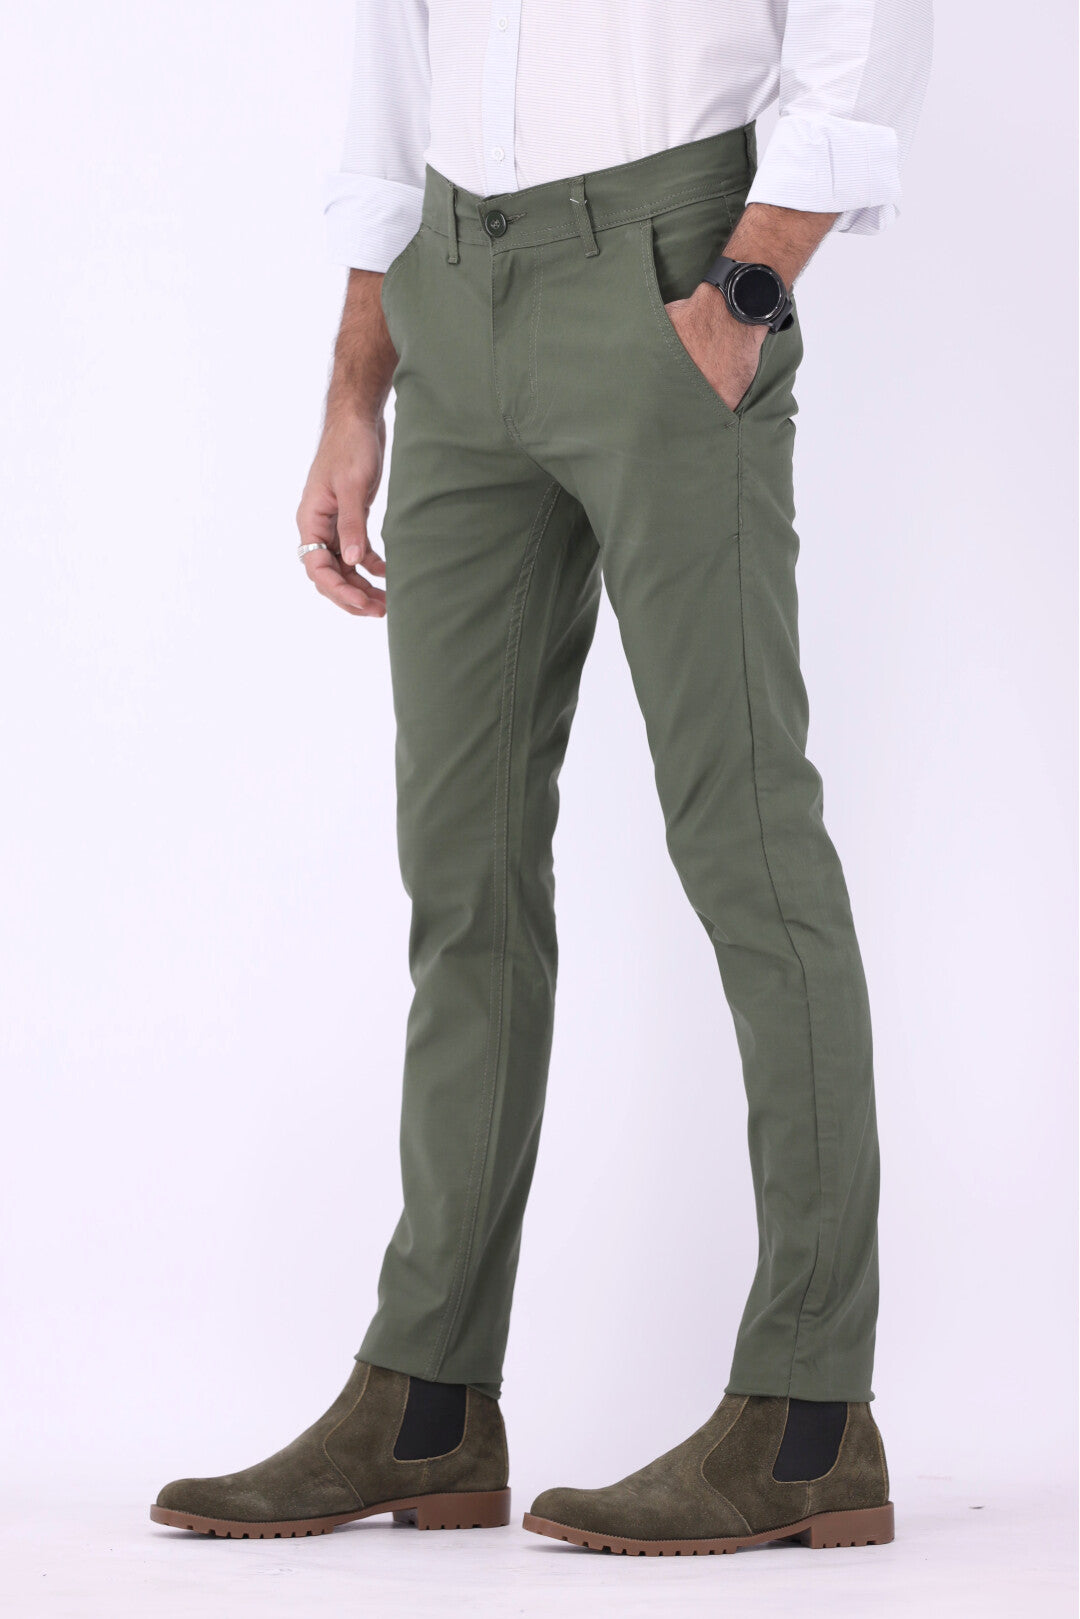 FT Cotton Chinos Pant - Green